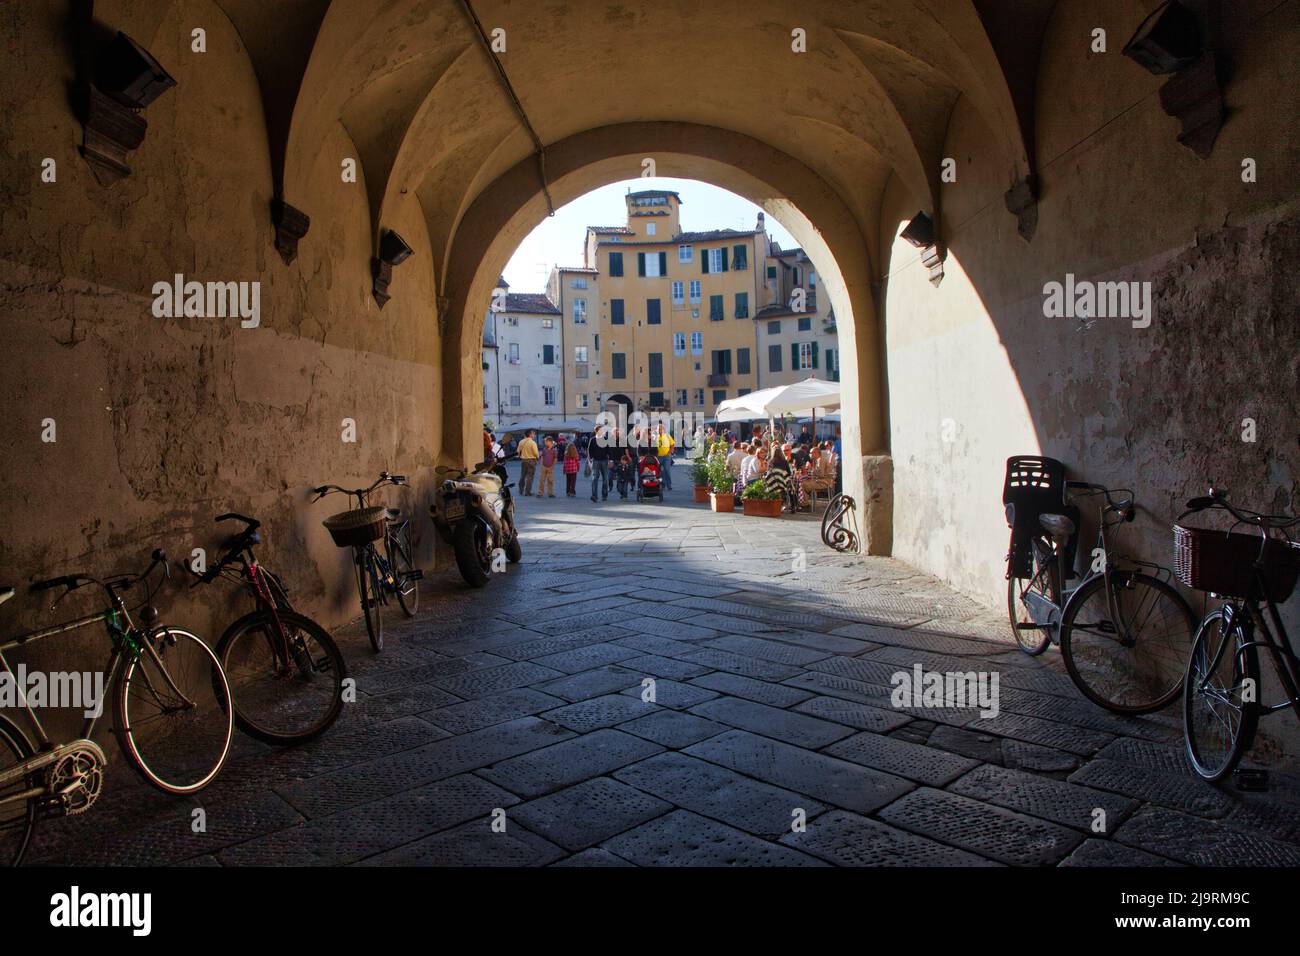 Italy, Tuscany, Lucca. Tunnel entrance to the Piazza dell'Anfiteatro Romano, lined with bicycles. Stock Photo